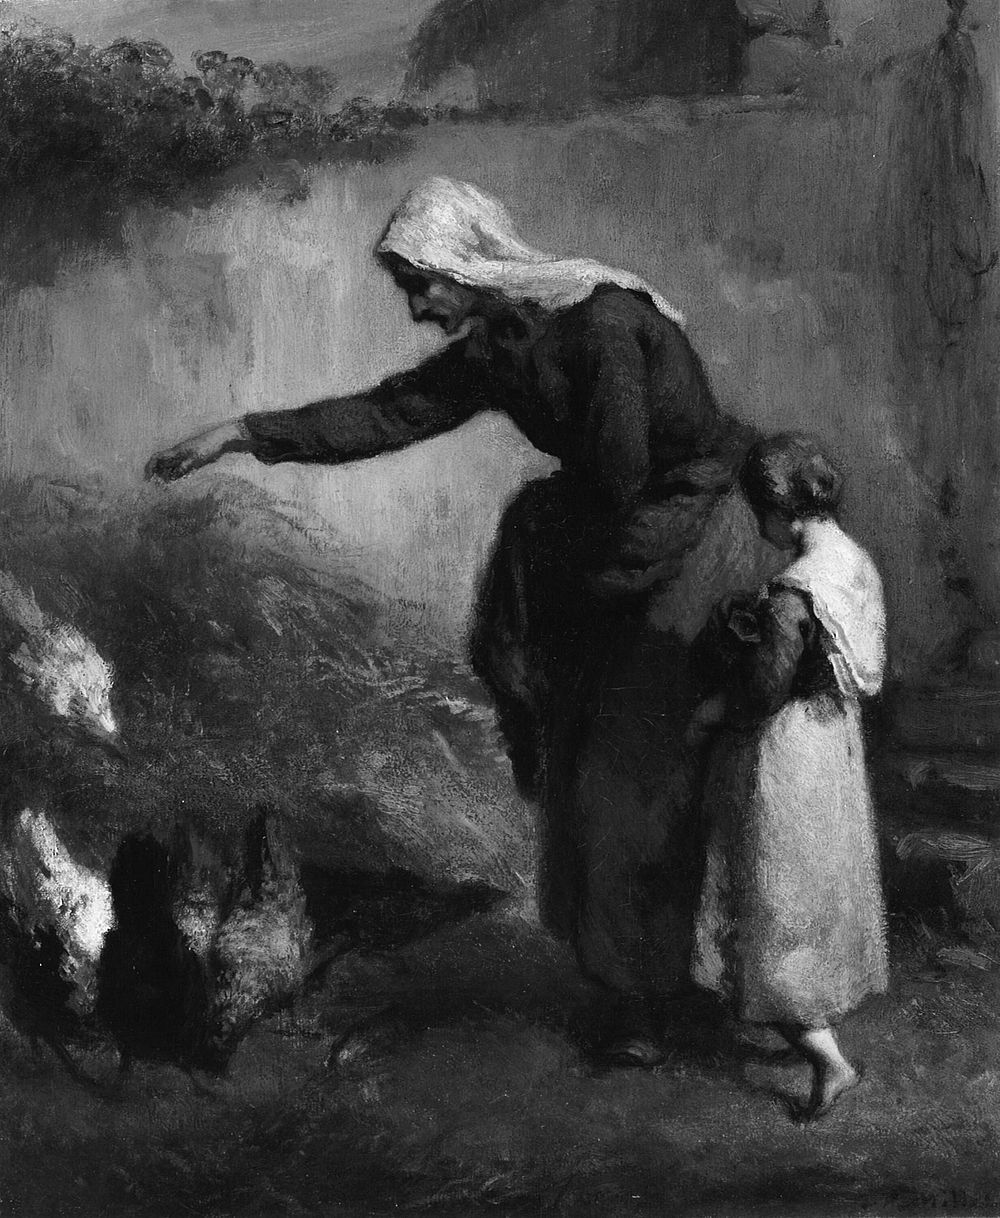 Woman Feeding Chickens by Jean François Millet